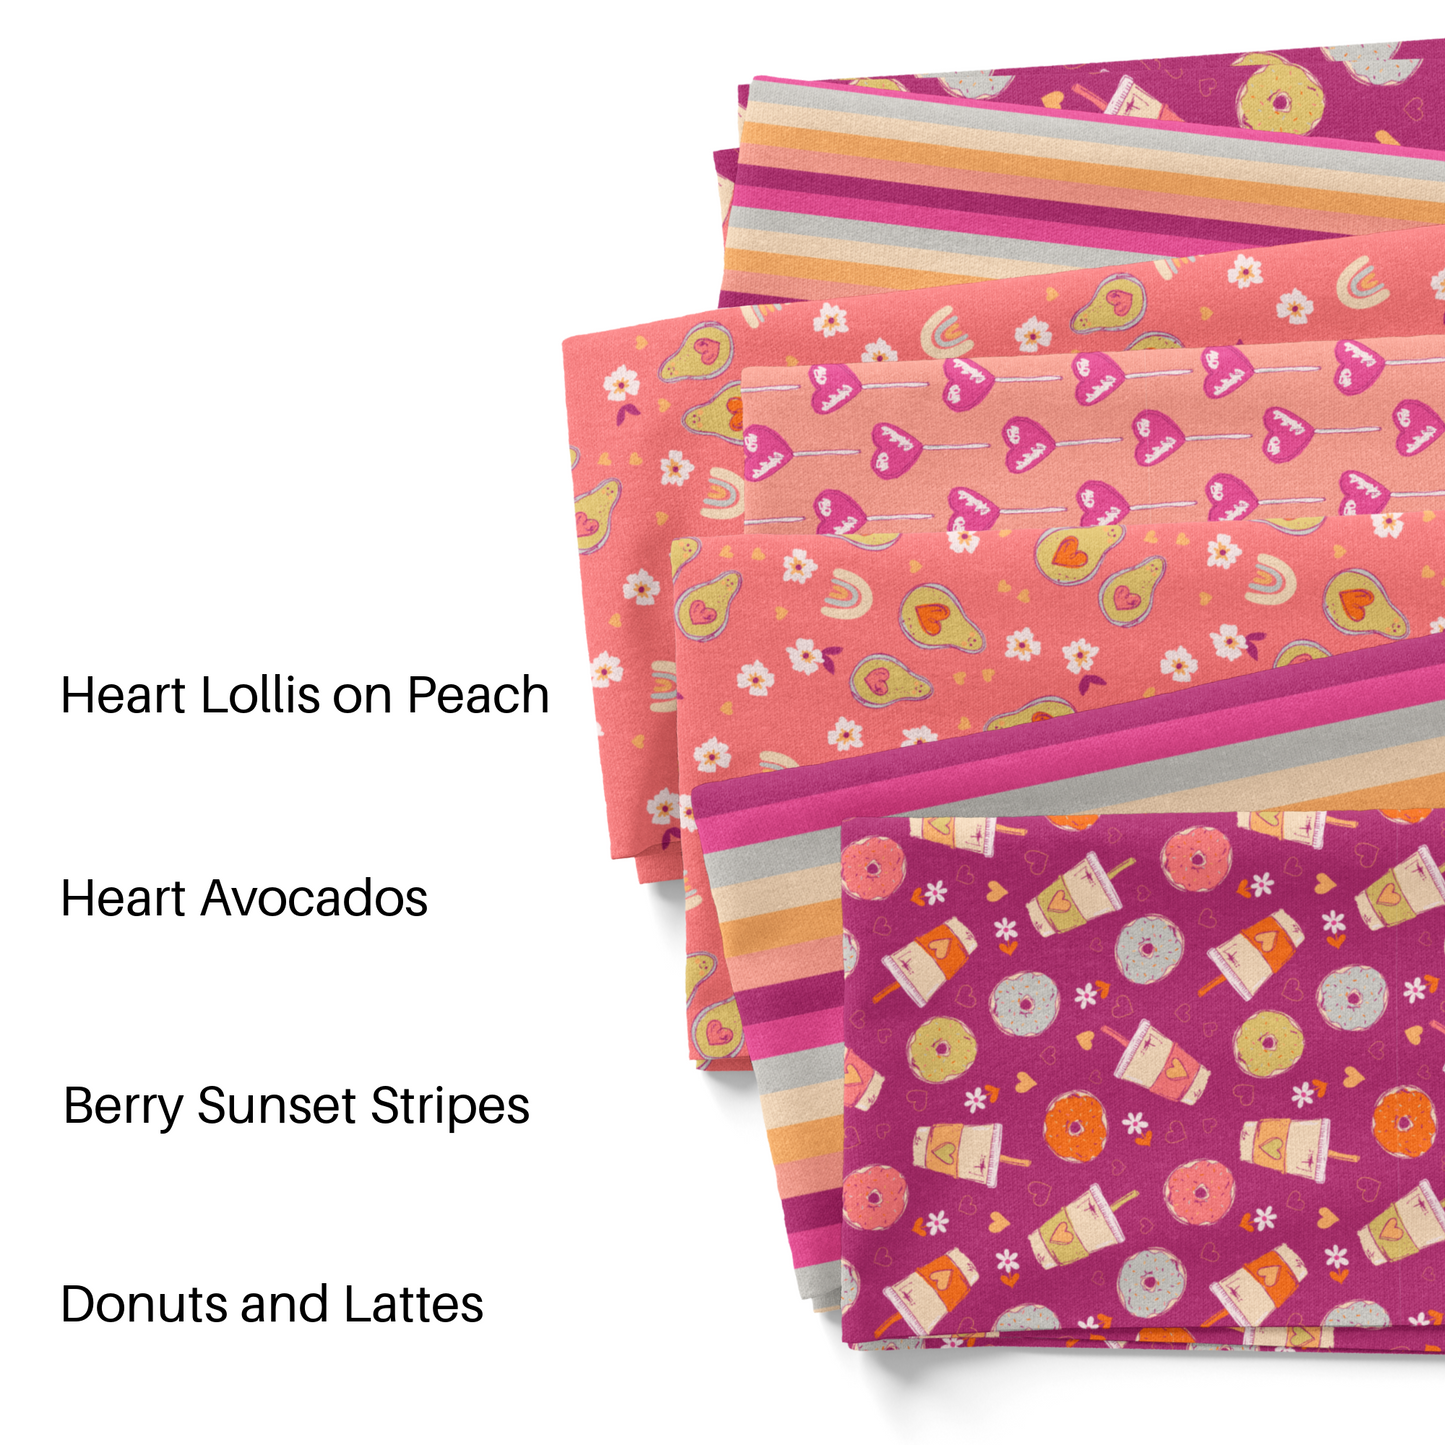 Heart Lollies on Peach Fabric By The Yard